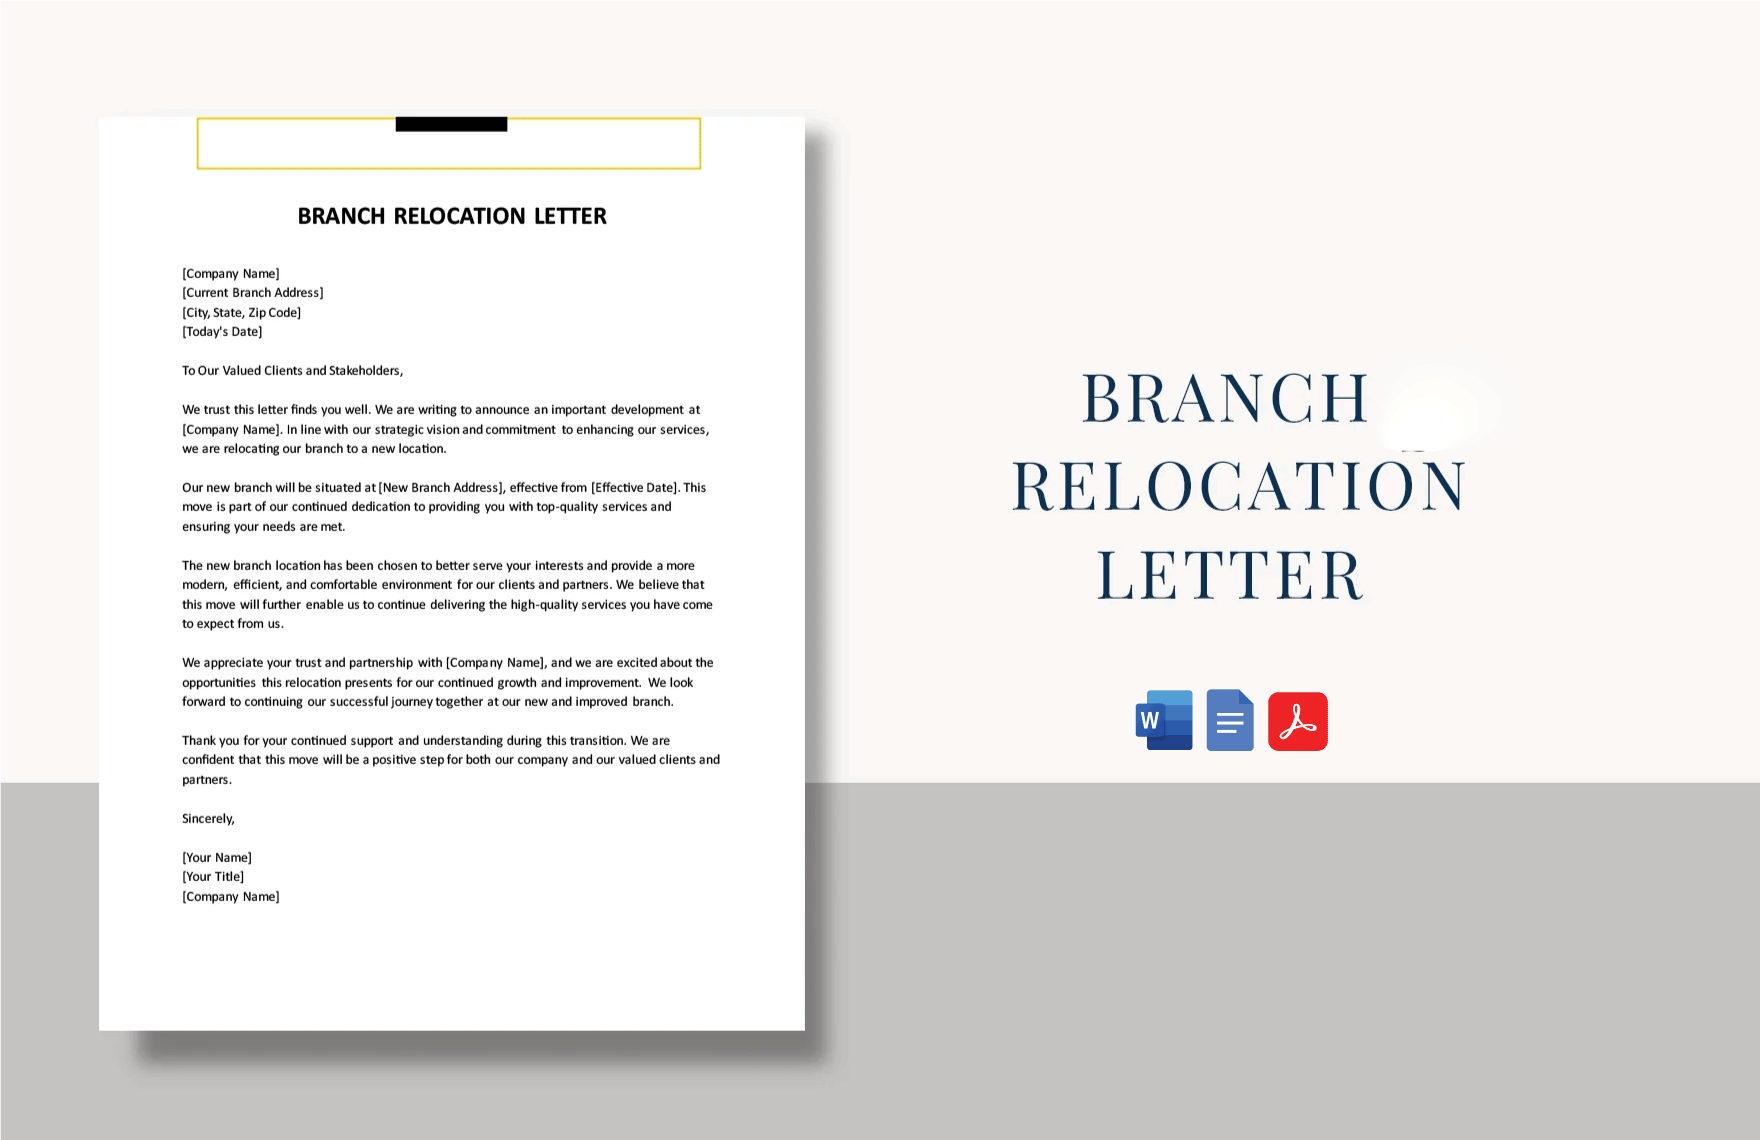 Branch Relocation Letter in Word, Google Docs, PDF